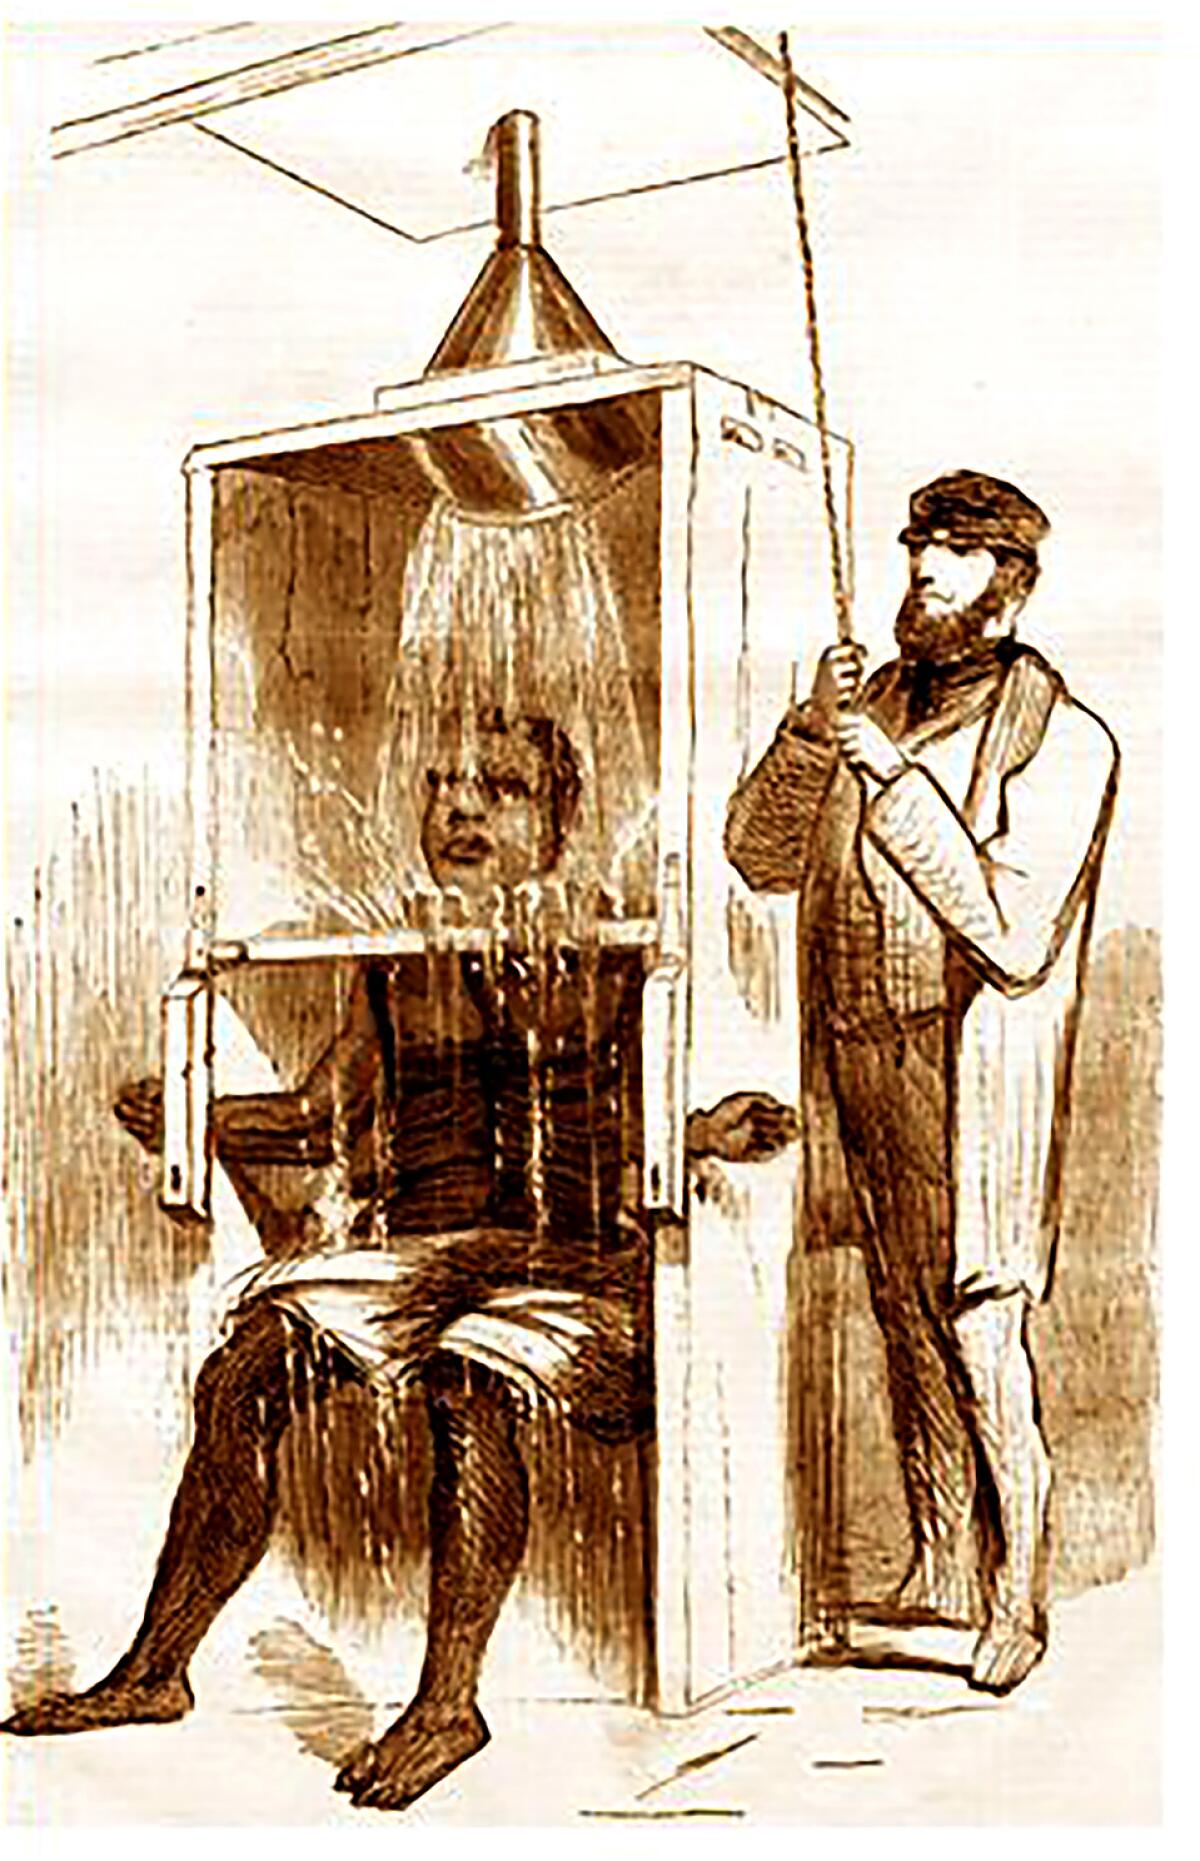 "Negro Convict Showered to Death" 